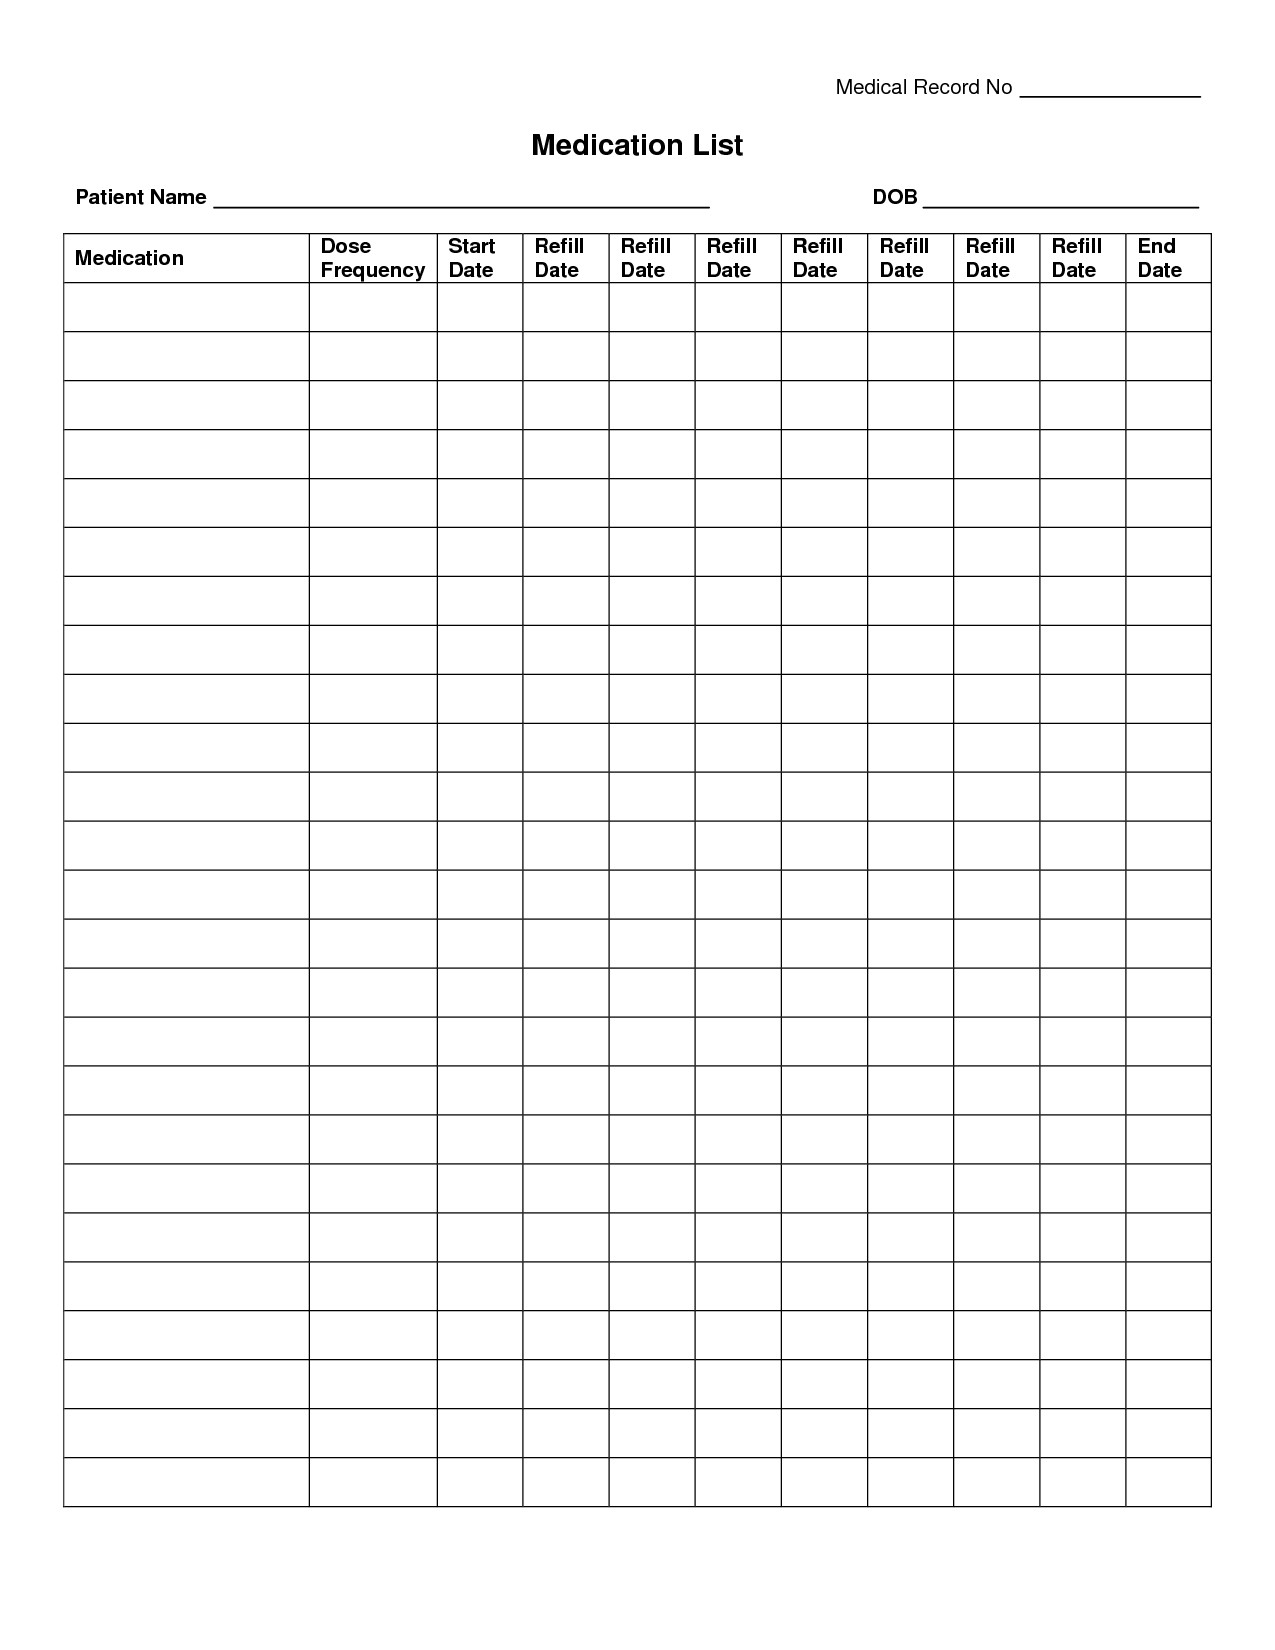 Medication Administration Record Template Excel Free Medication Administration Record Template Excel